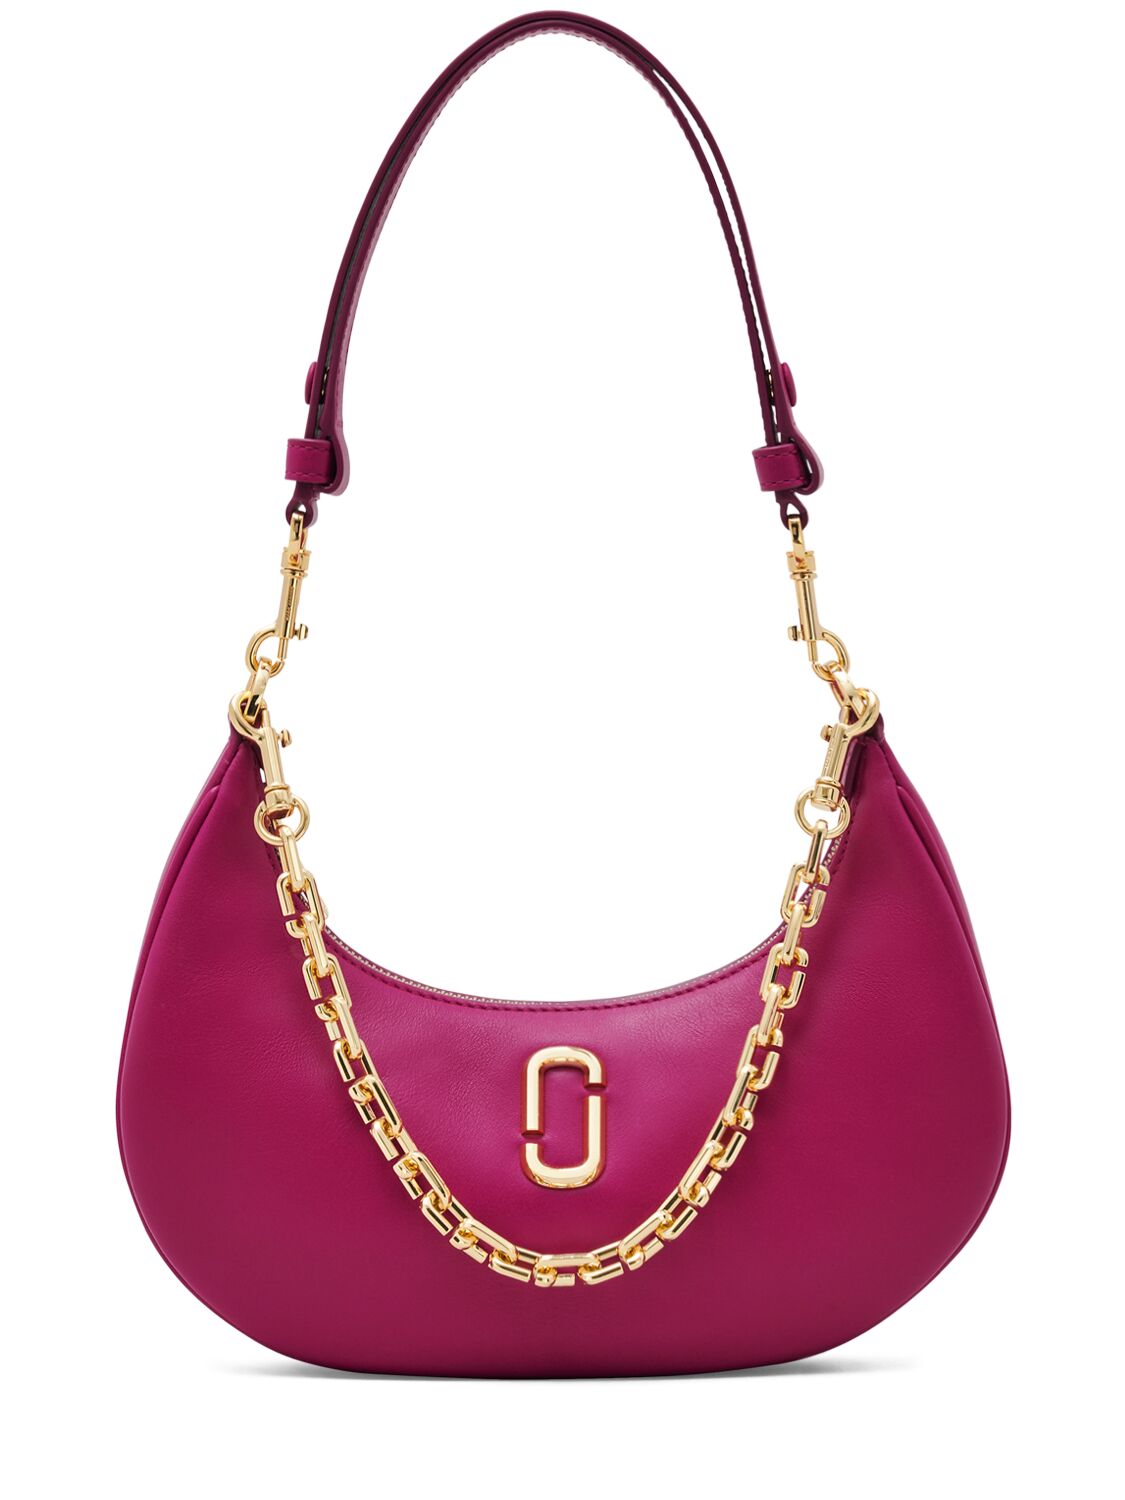 Marc Jacobs The Small Curve Leather Shoulder Bag In Lipstick Pink